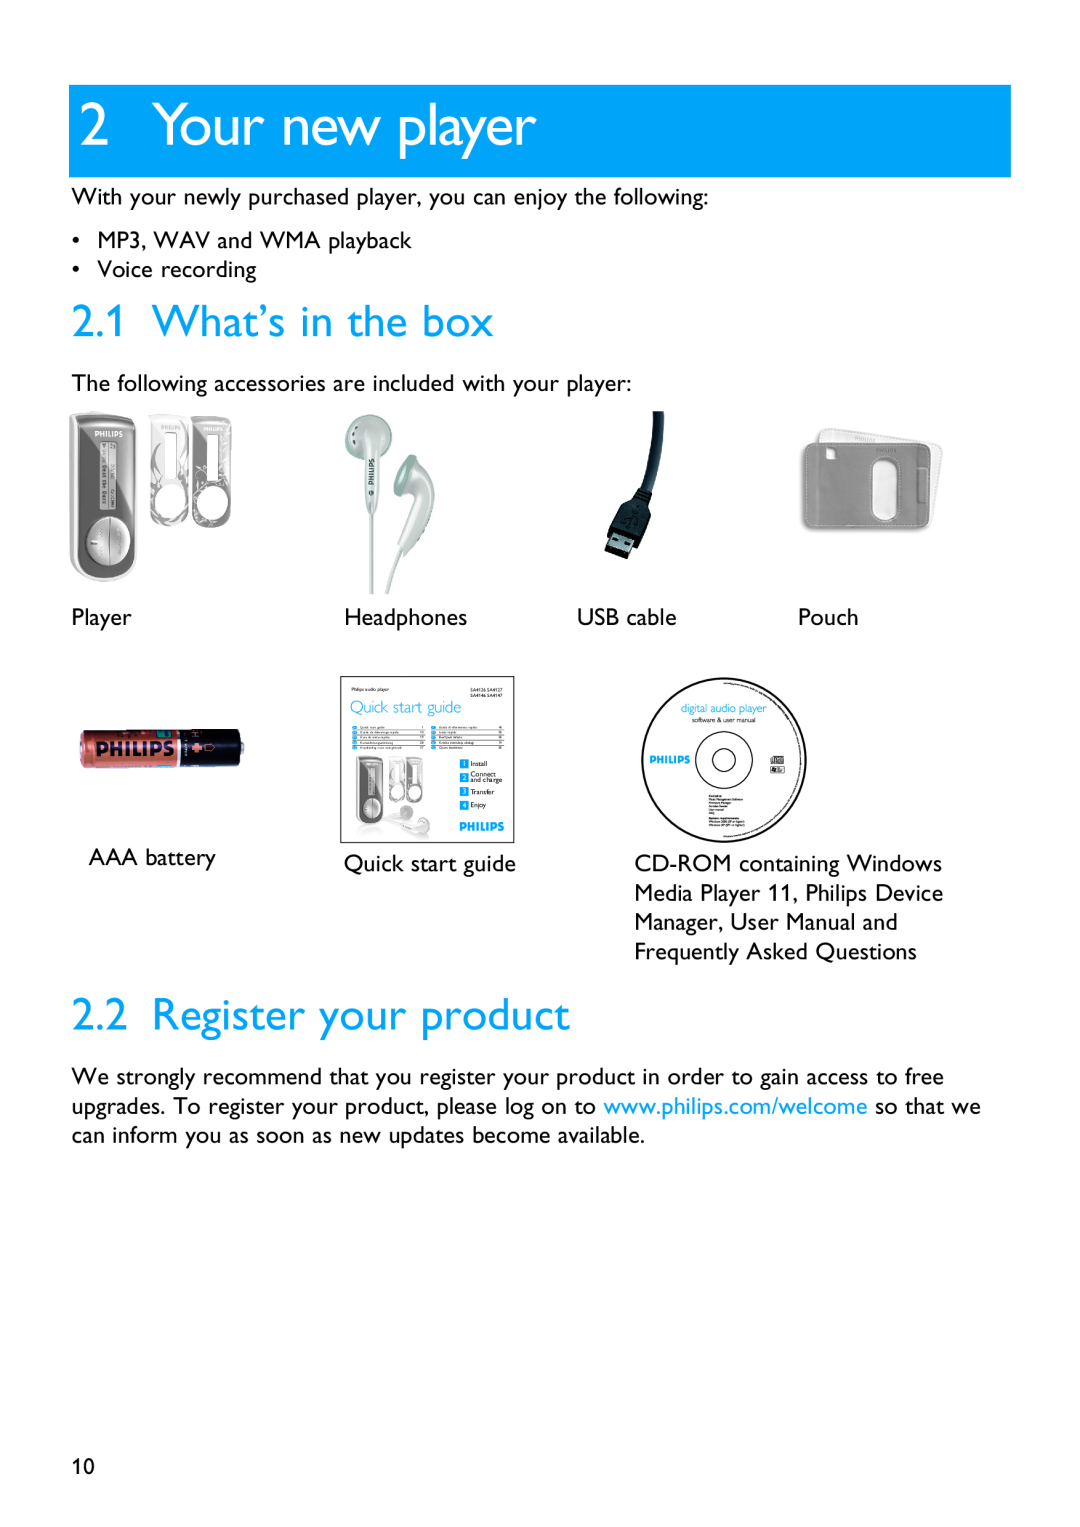 Philips SA4127 Your new player, What’s in the box, Register your product, Frequently Asked Questions, Quick start guide 